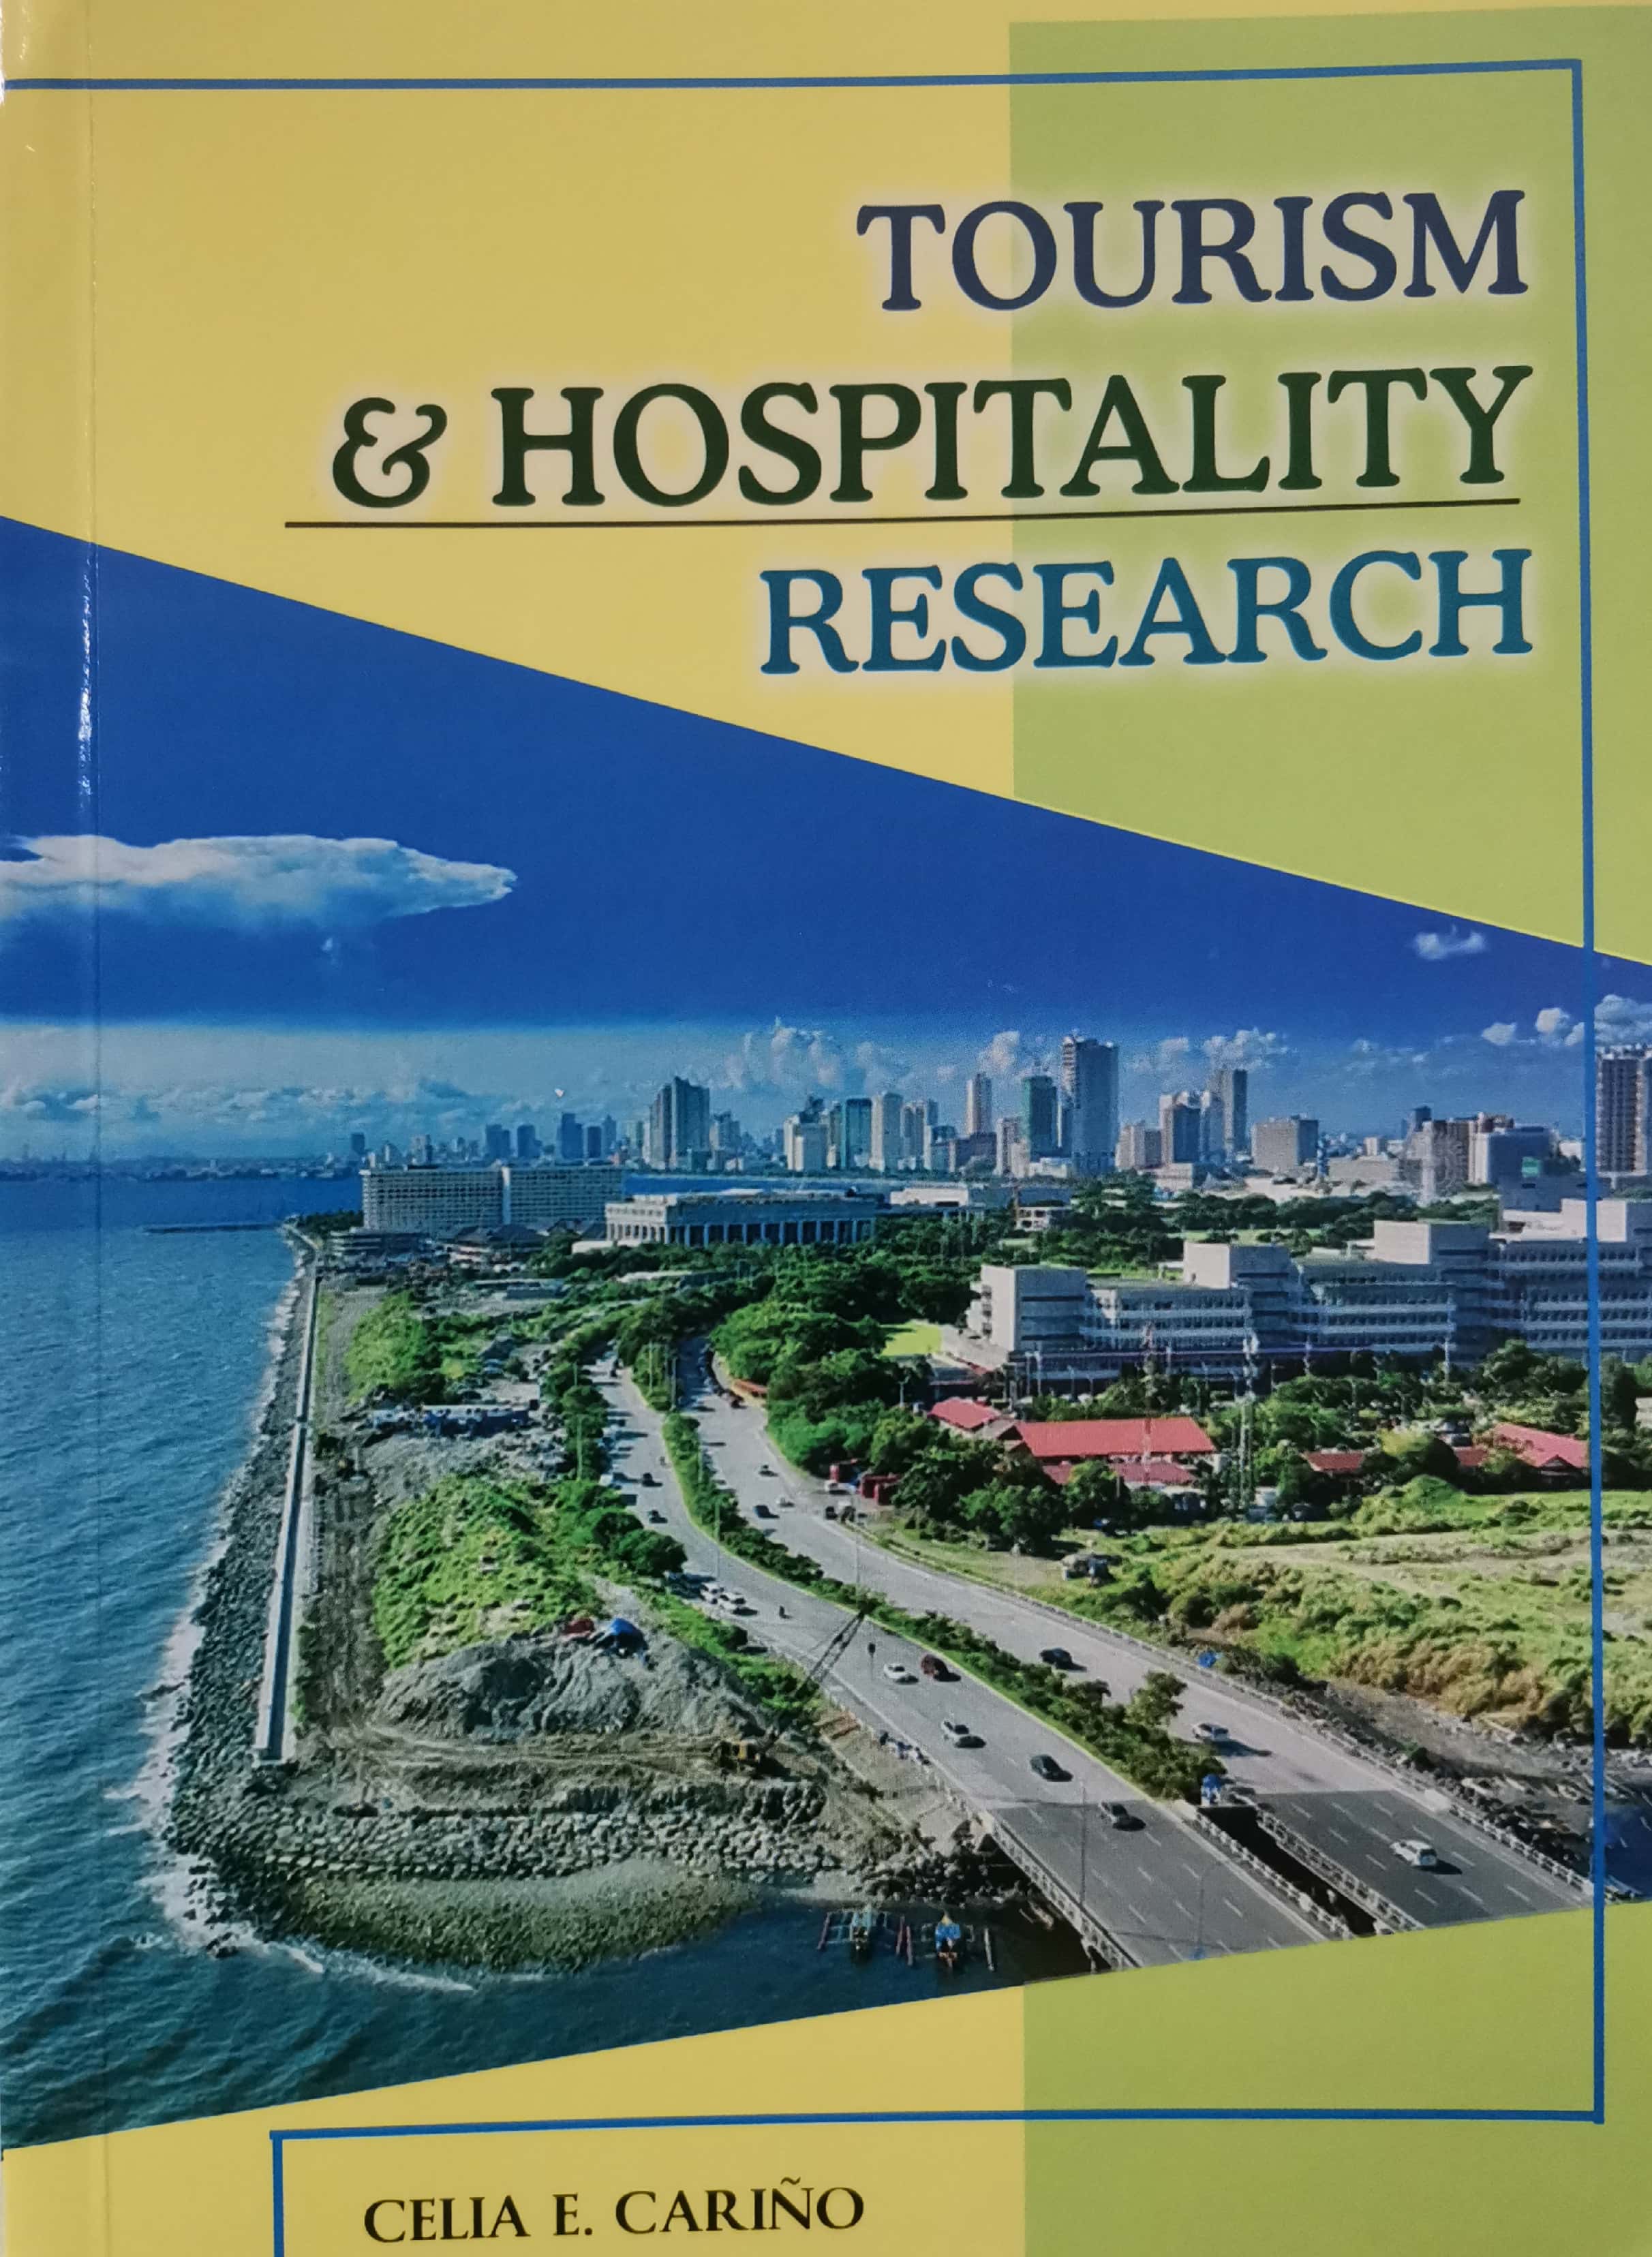 thesis on tourism and hospitality